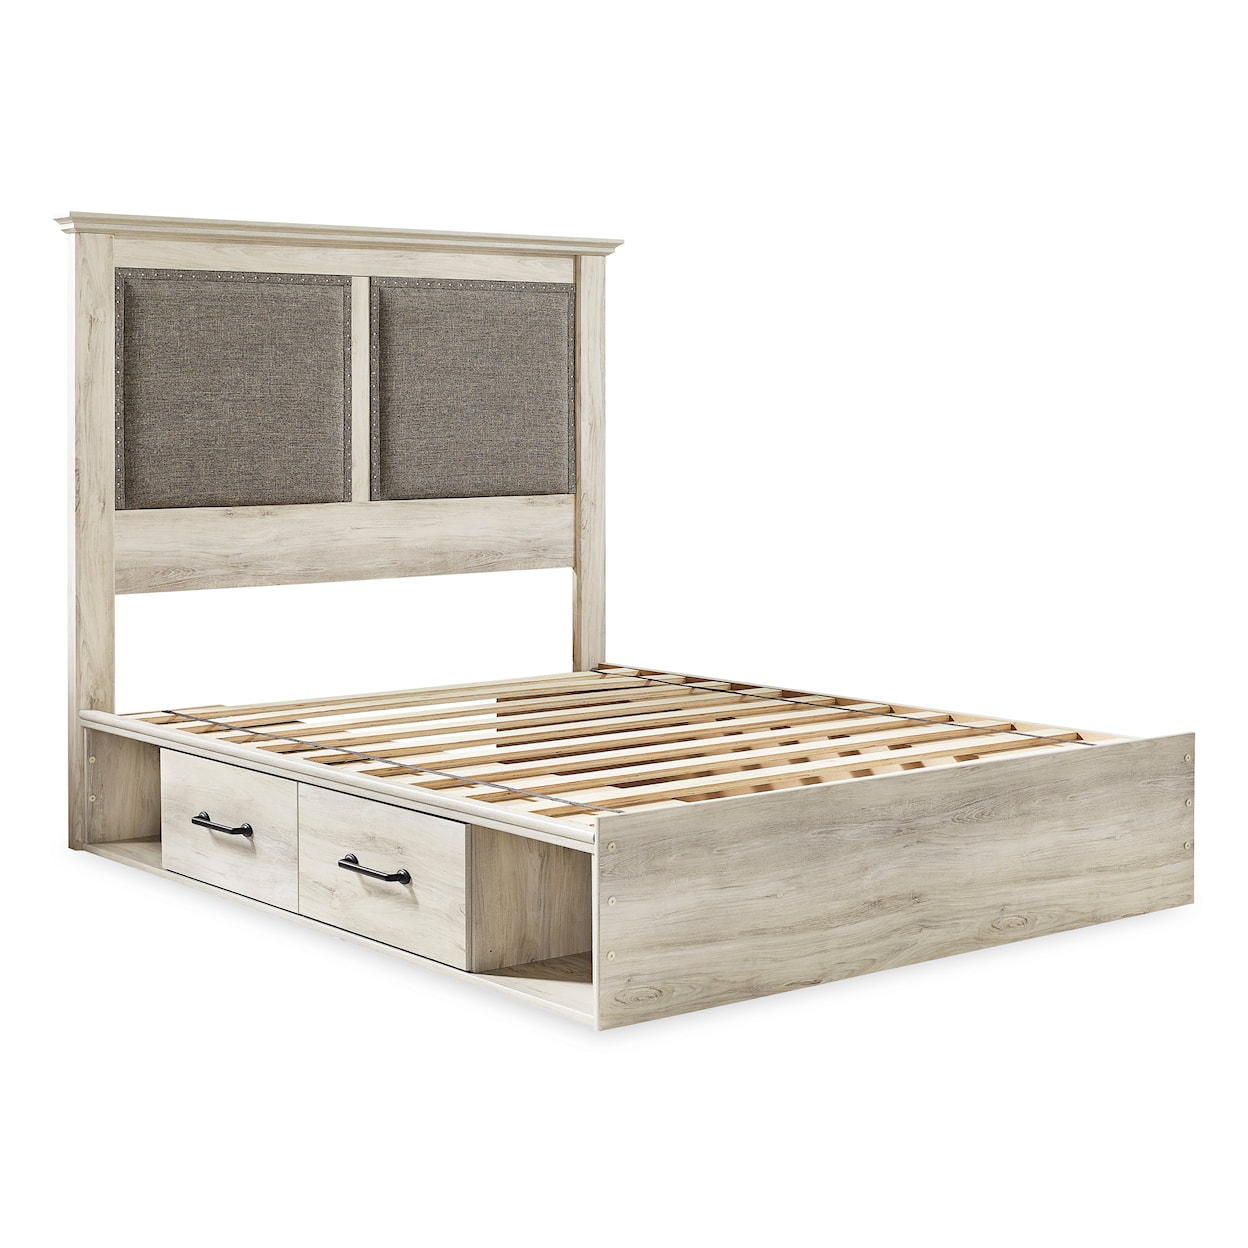 Signature Design by Ashley Cambeck King Upholstered Bed w/ 4 Drawers